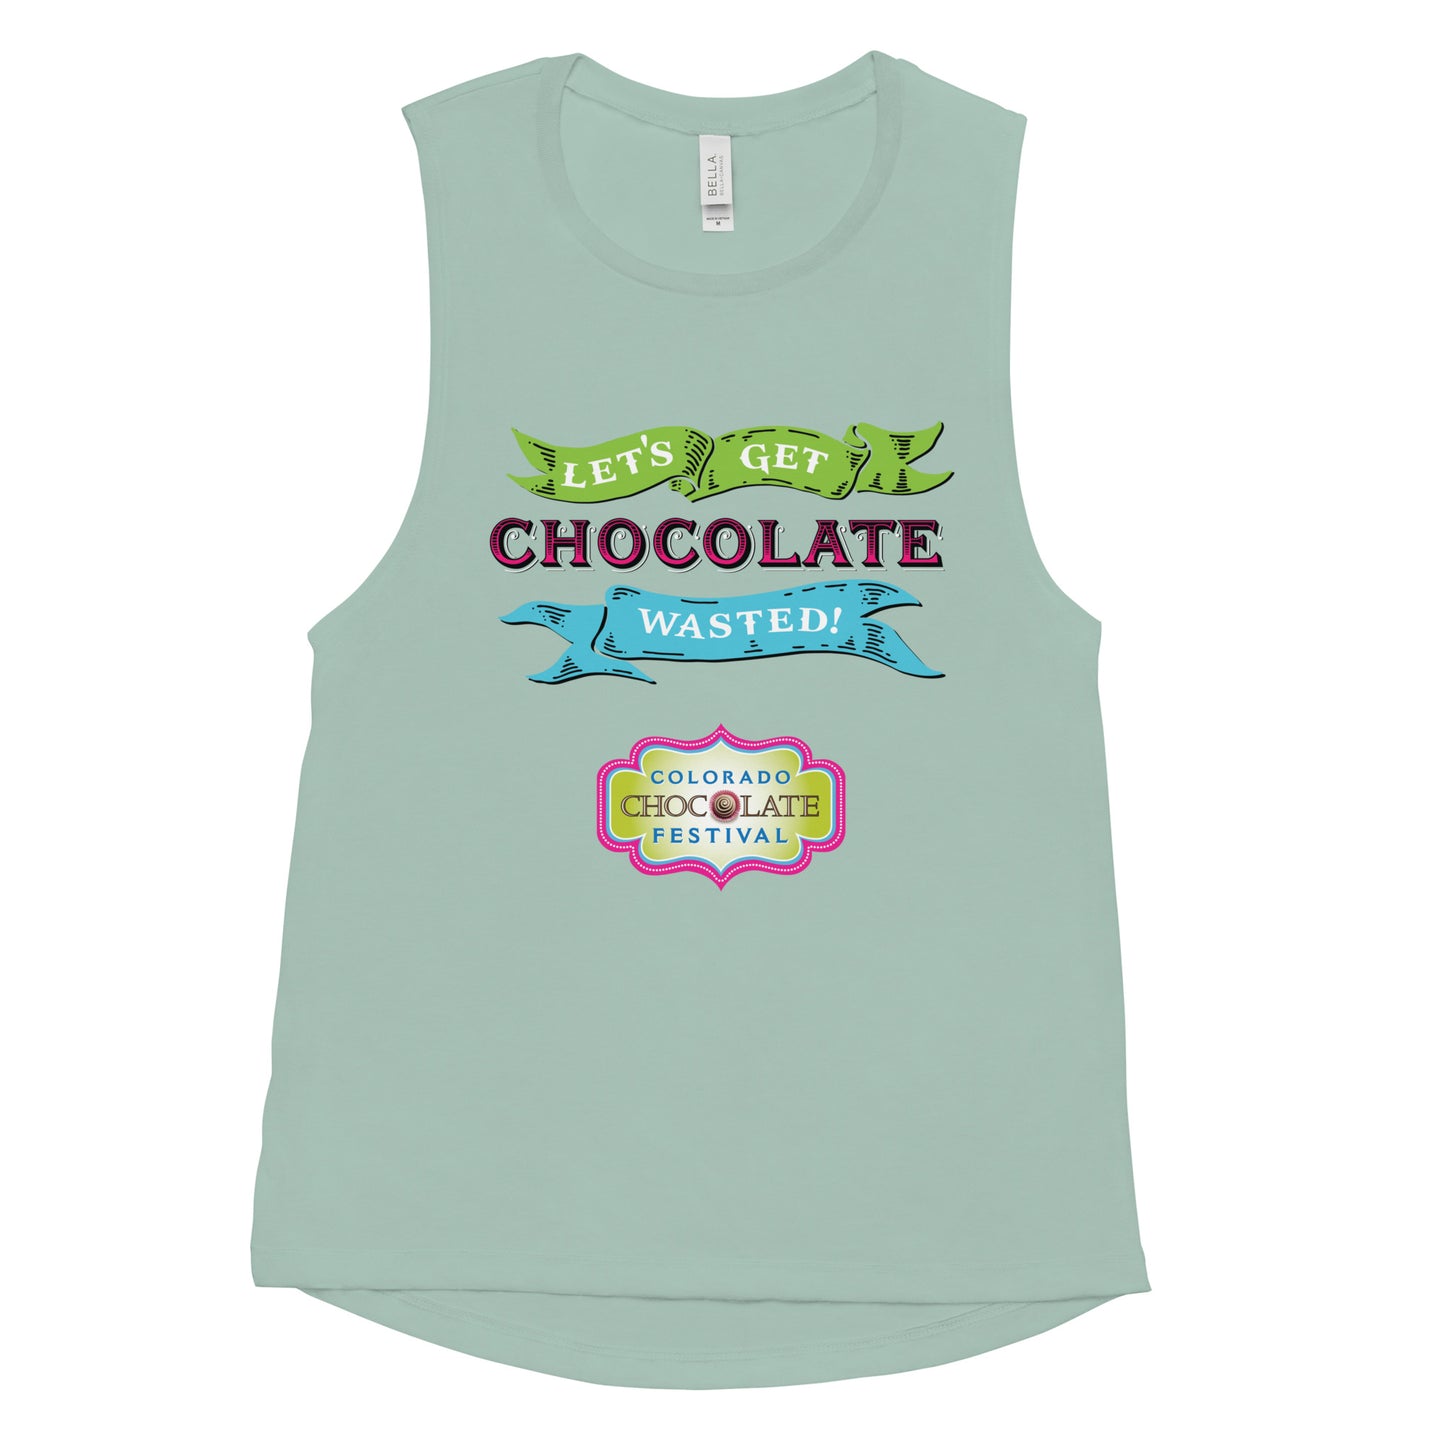 Chocolate Wasted Ladies’ Muscle Tank